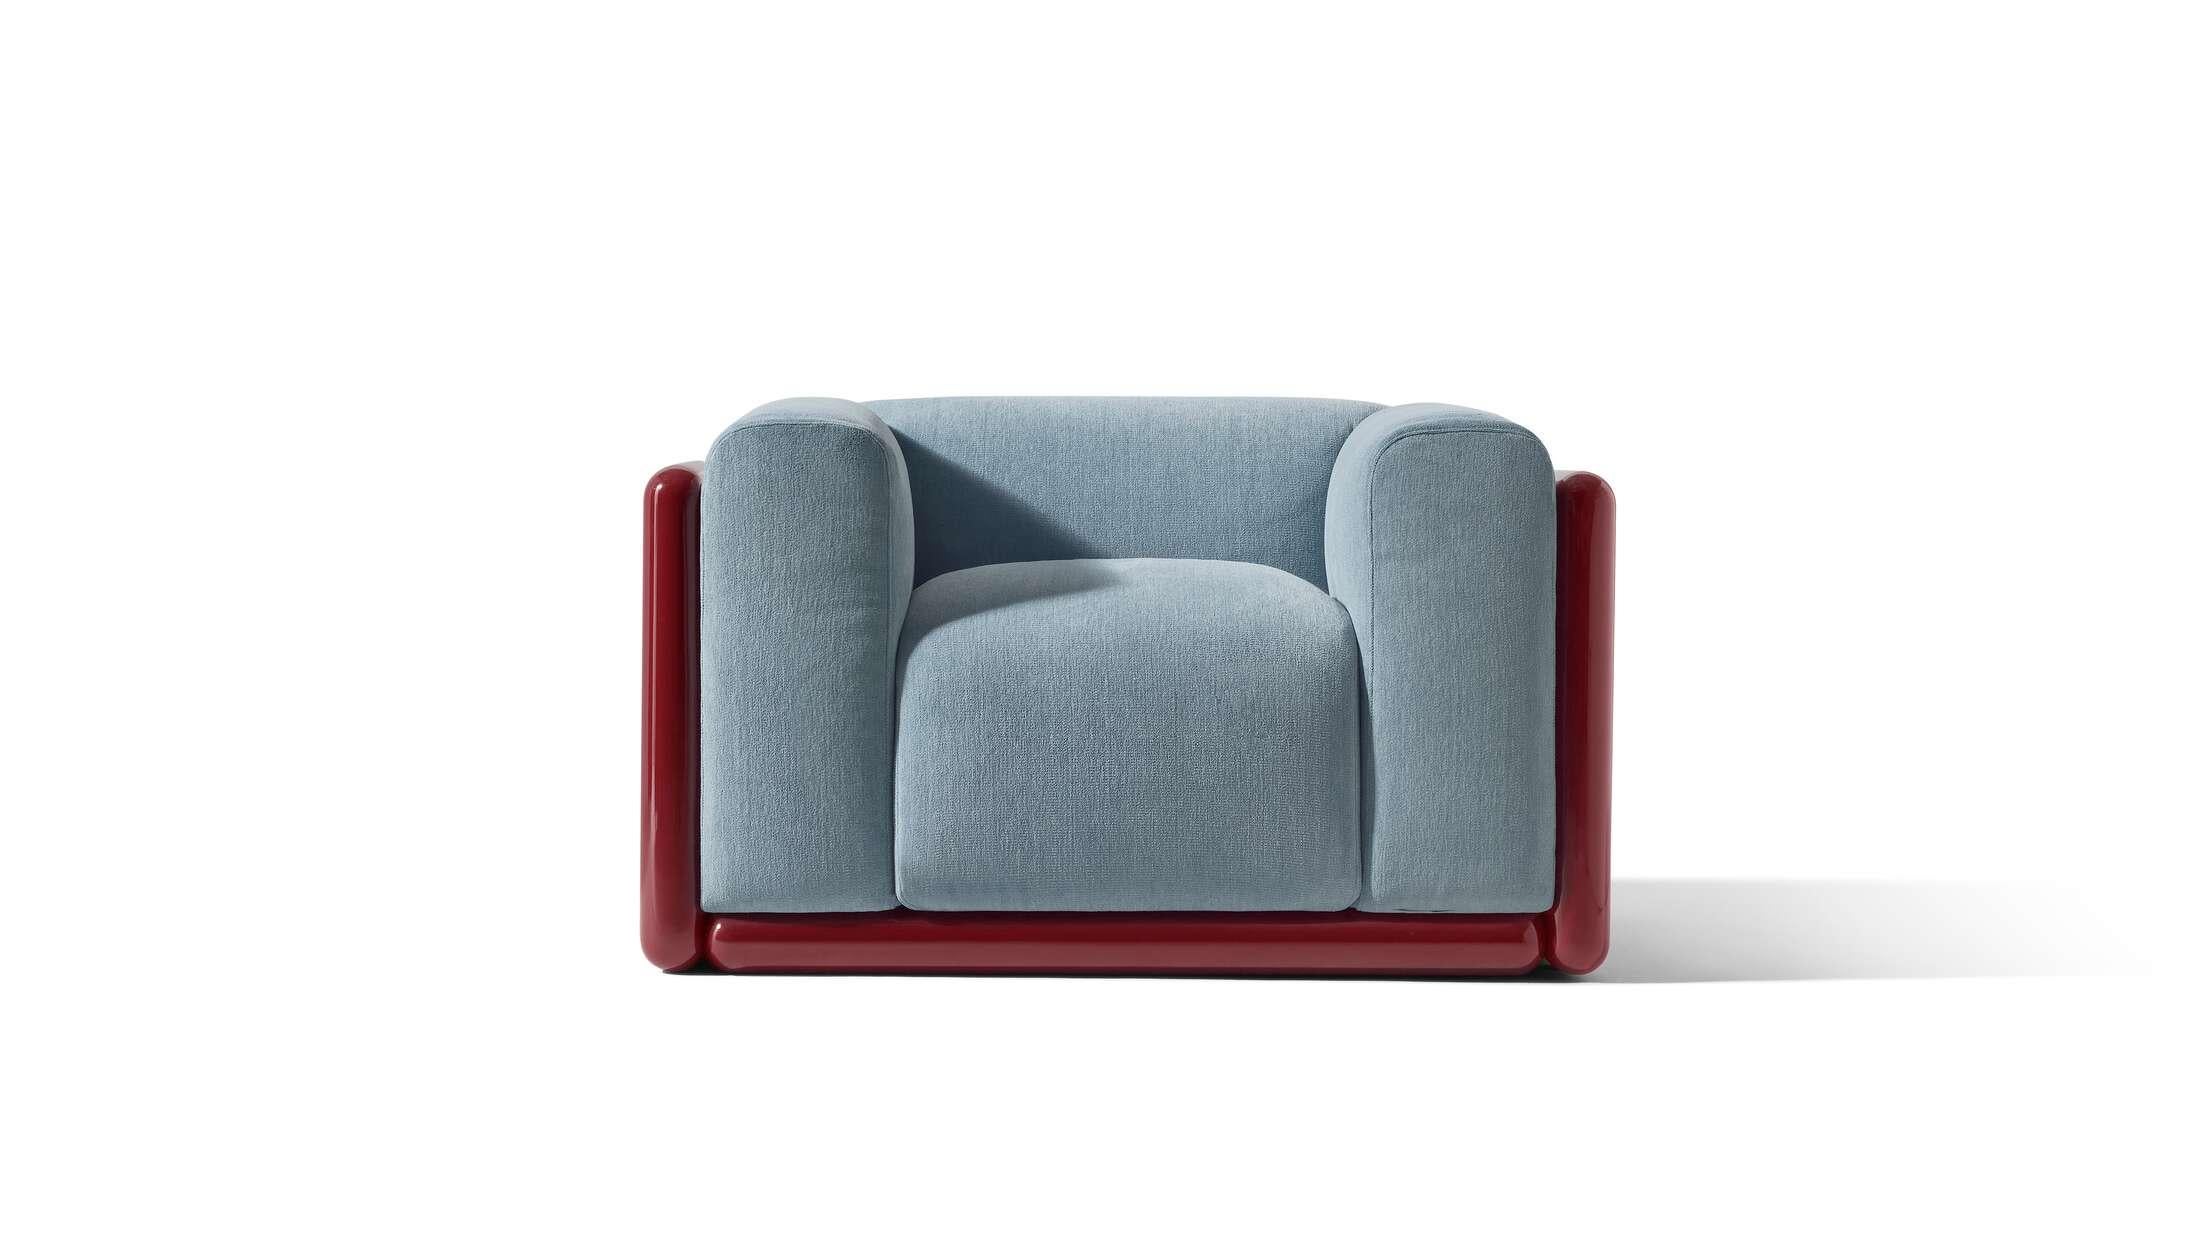 Carlo Scarpa Cornaro Armchair 
Manufactured by Cassina

SCULPTURAL ELEGANCE

A favourable balance between geometric rigour and enveloping shapes designed by maestro Carlo Scarpa.

The Cornaro armchair celebrates the encounter of two opposites